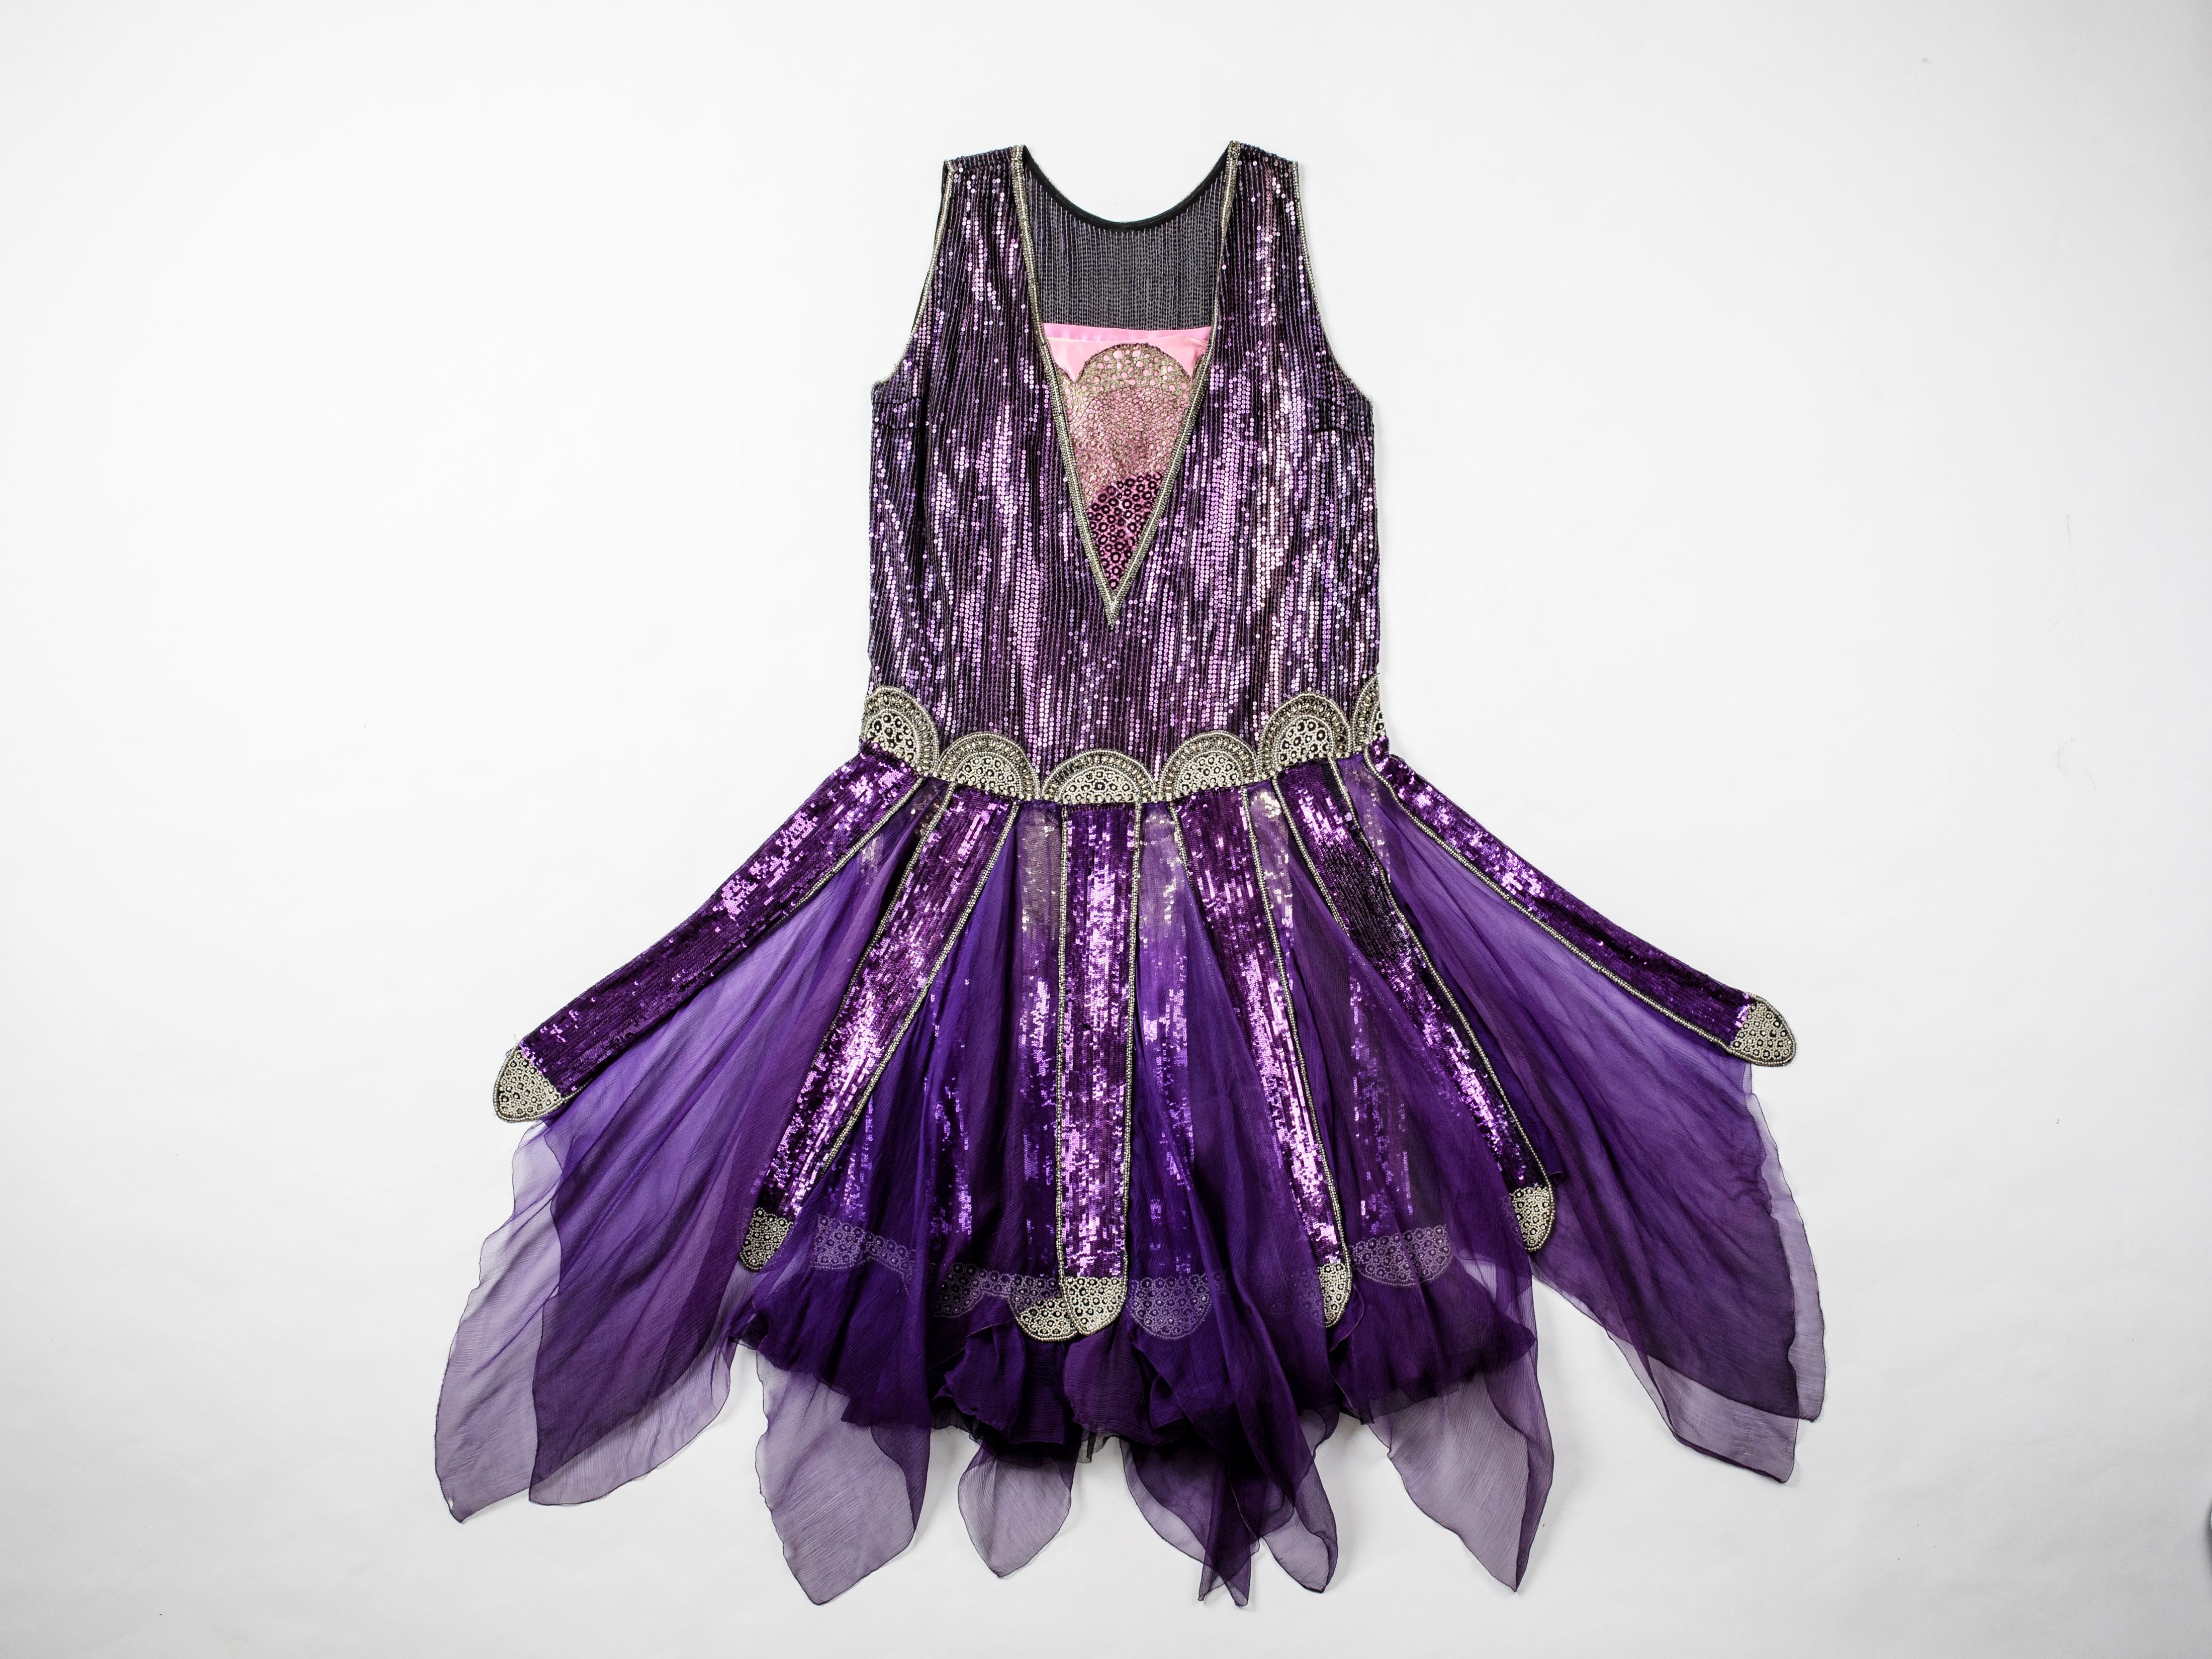 A Paul Poiret Ball Gown in Sequined Silk Crepe and Satin - France Circa 1925 For Sale 12